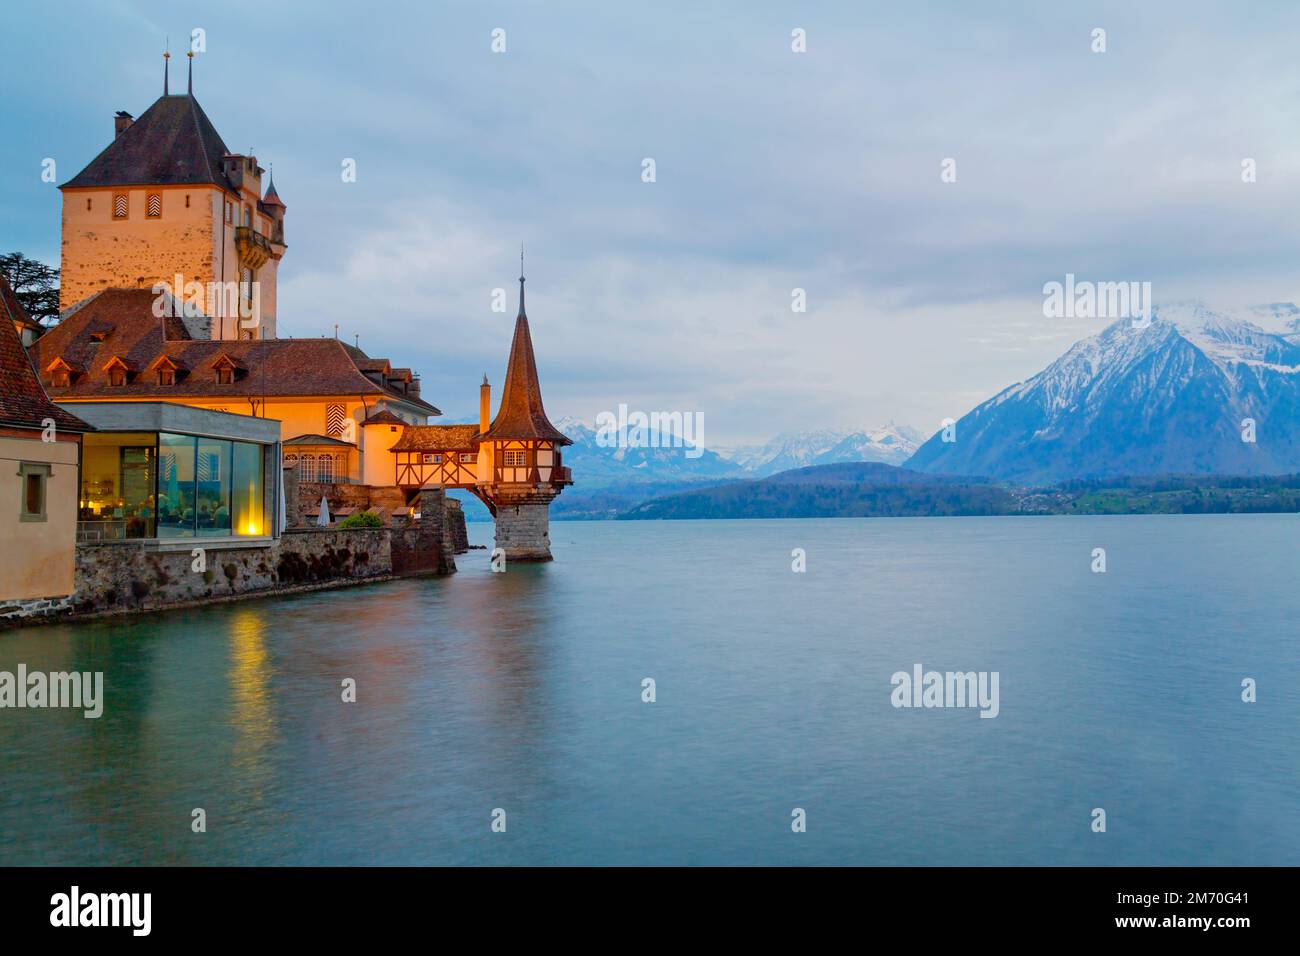 Oberhofen Castle at Lake Thunersee in swiss Alps, Switzerland Stock Photo